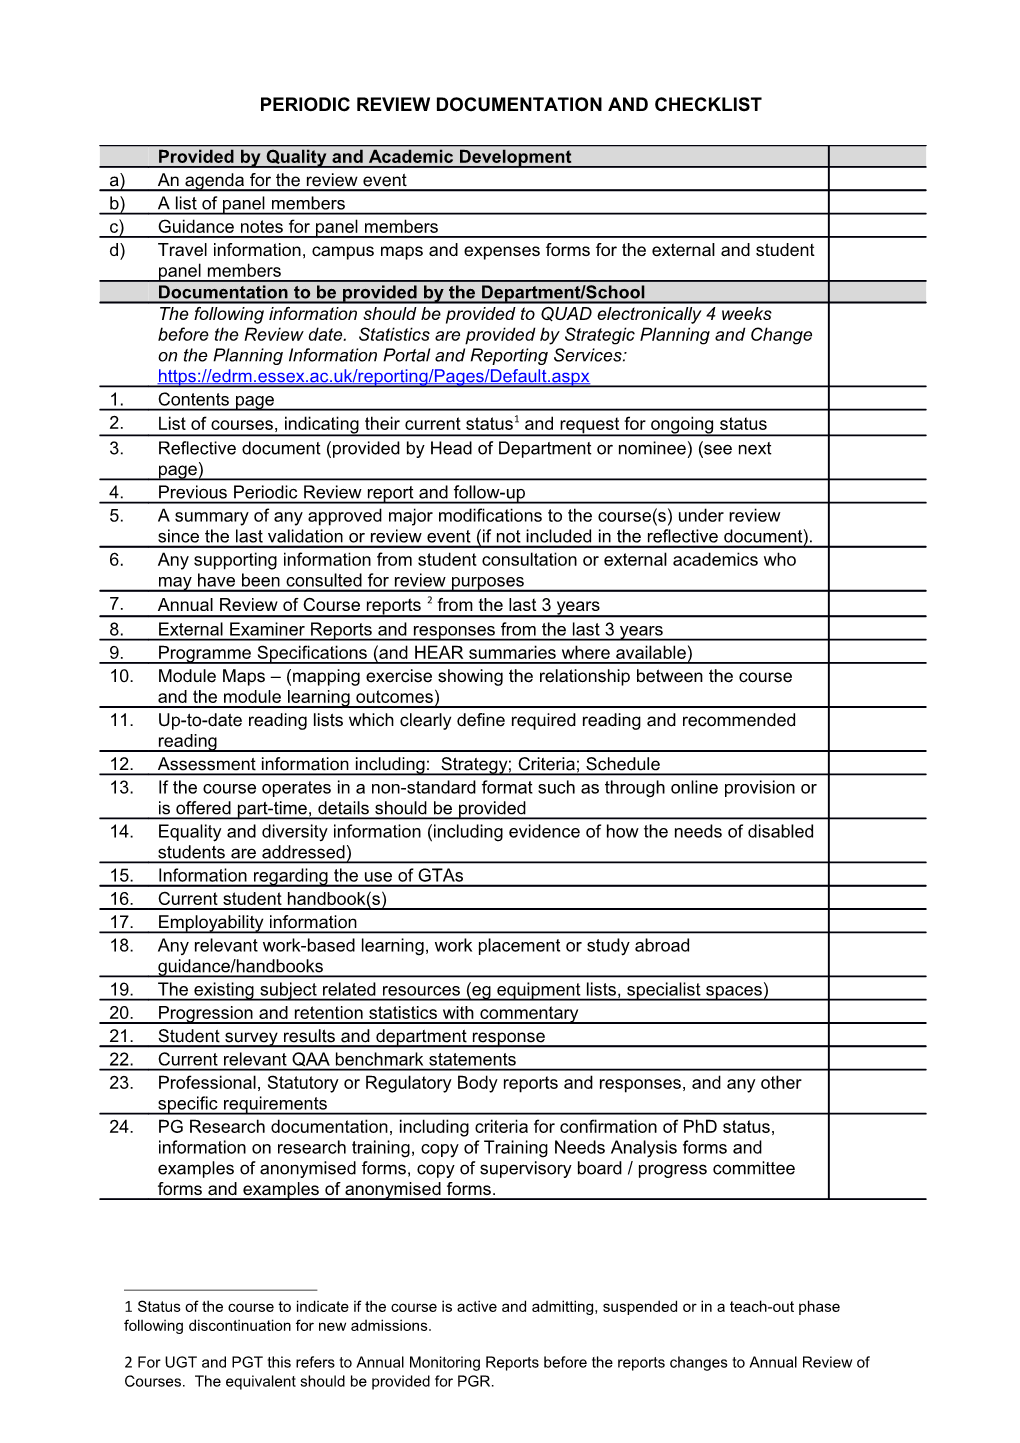 Periodic Review Documentation and Checklist